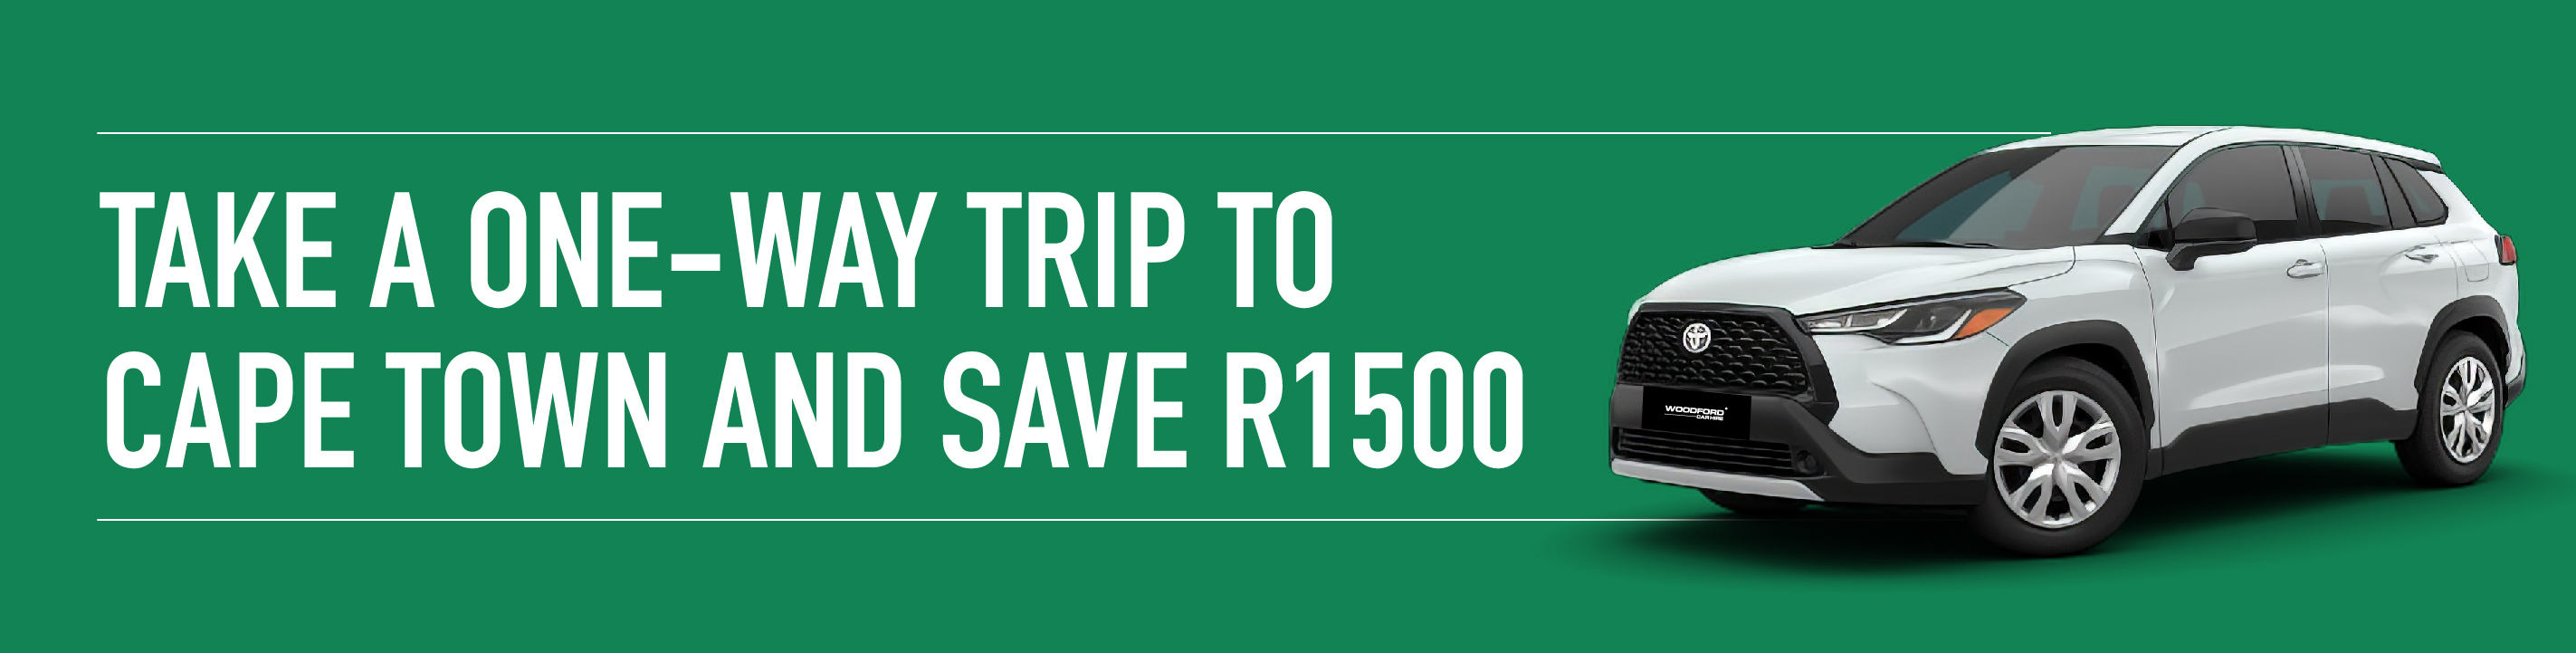 Save on Your Journey to Cape Town.